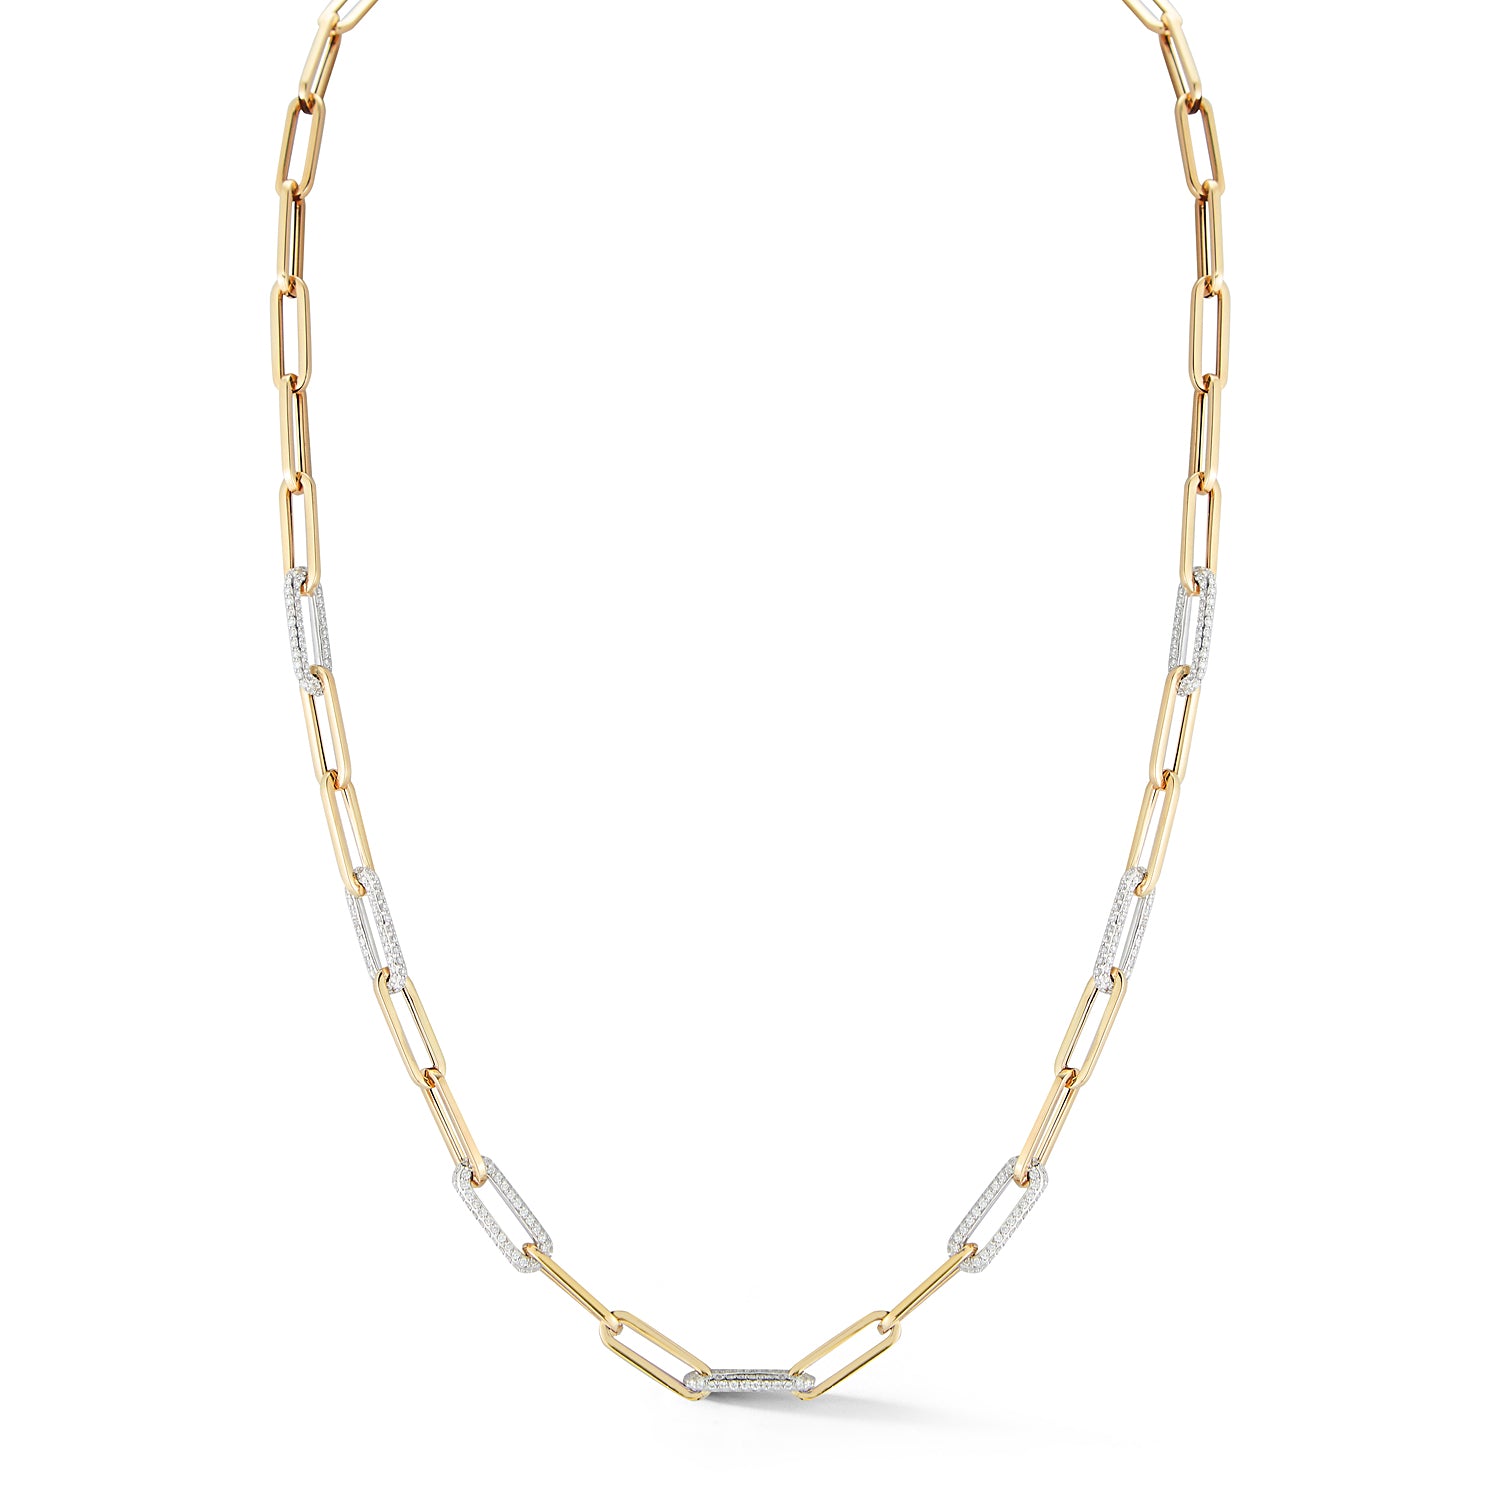 King's Yellow Gold Paper Clip Necklace with Diamond Push Lock